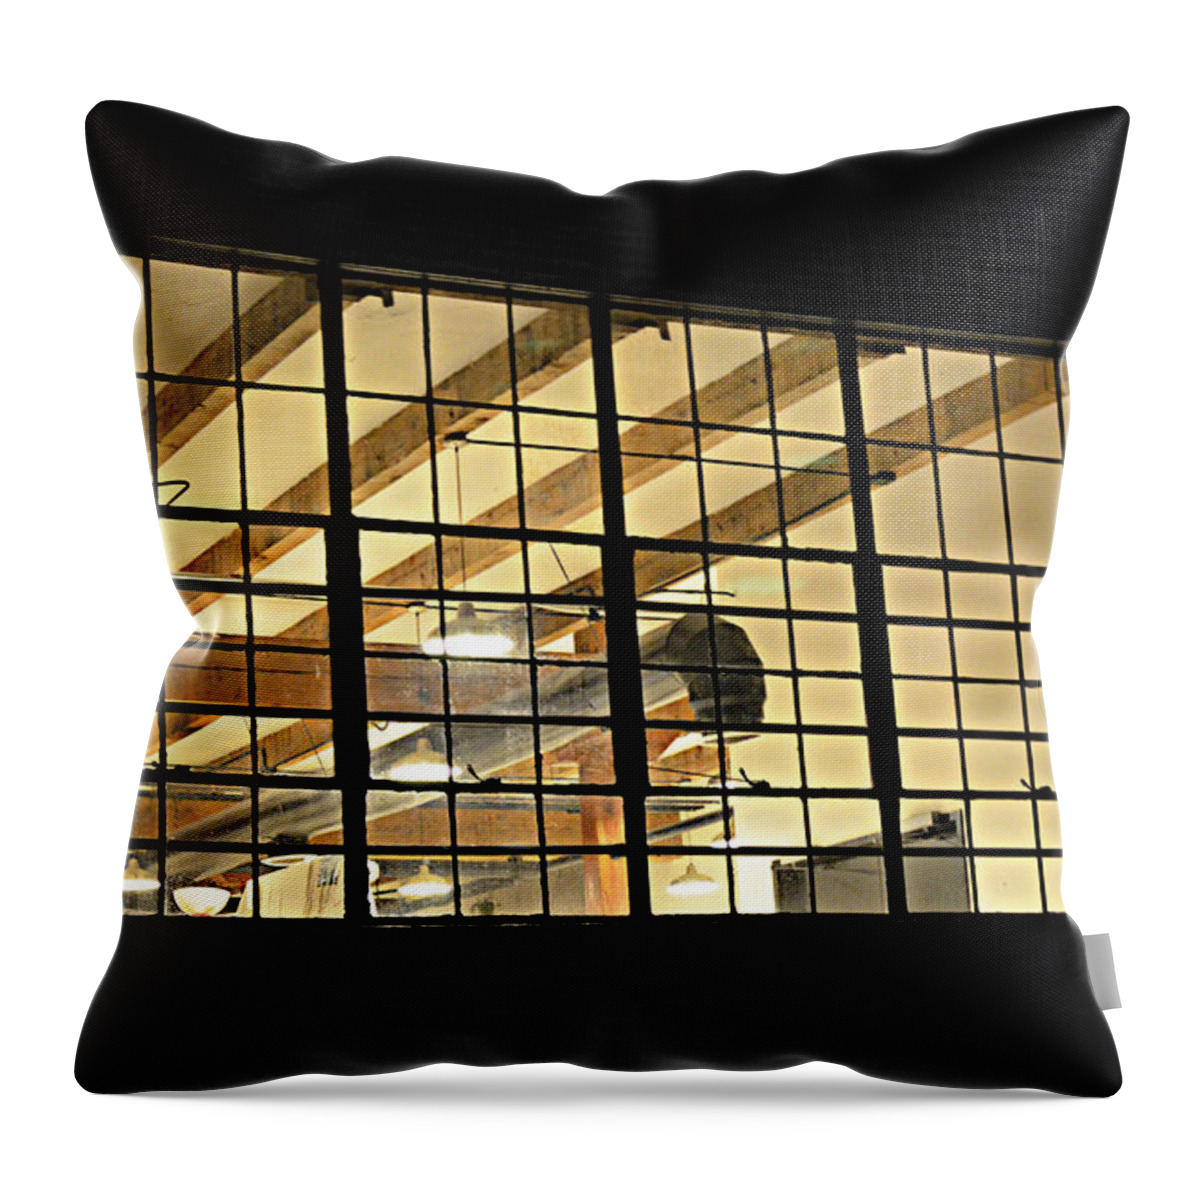 Night Throw Pillow featuring the photograph Night Window by Ally White